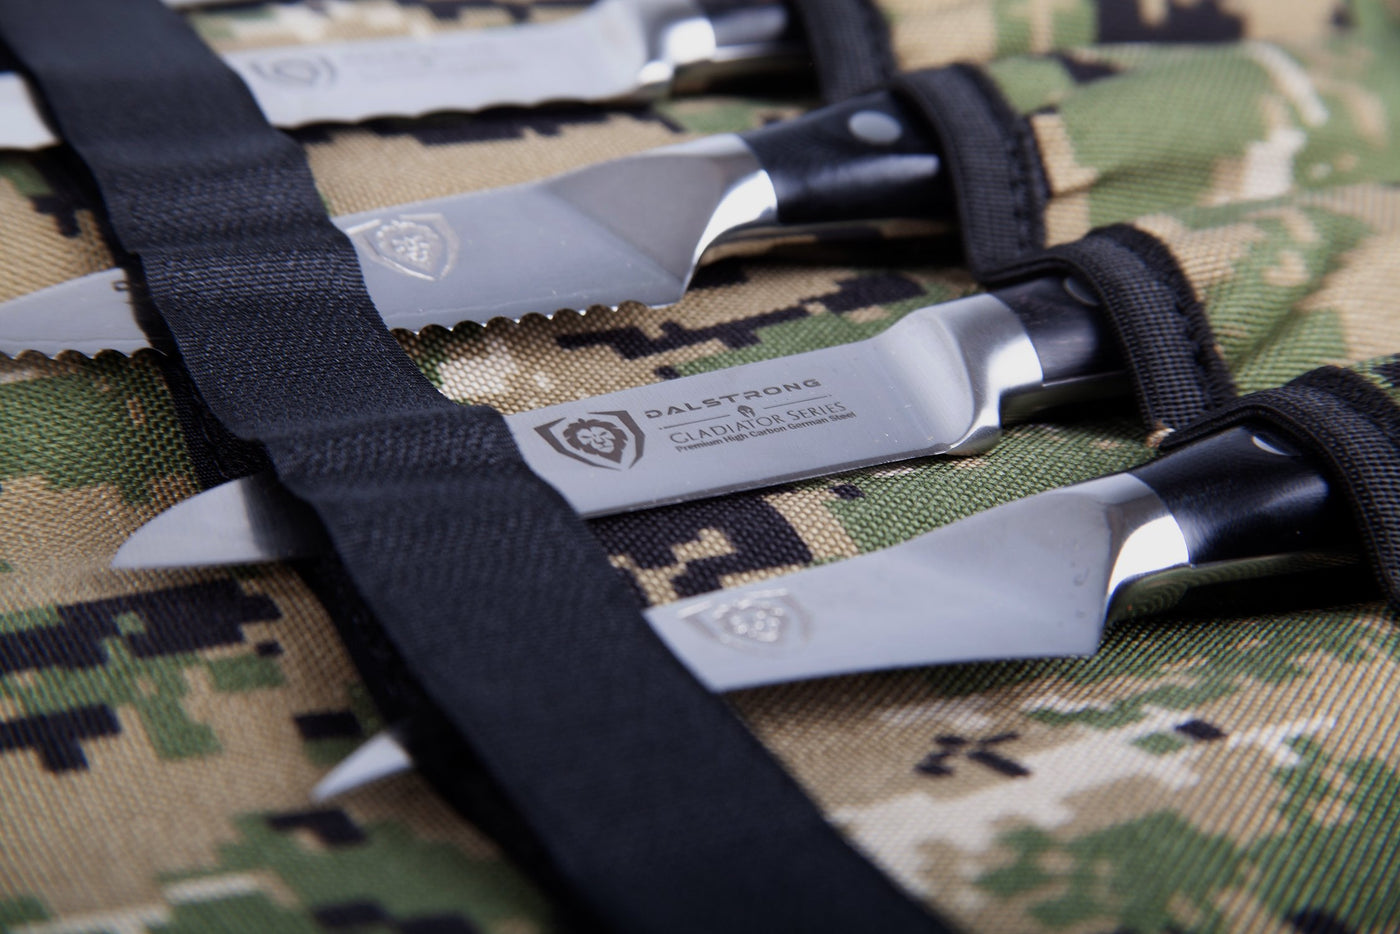 Premium Knife Roll | Camouflage | Ballistic Series | Dalstrong ©